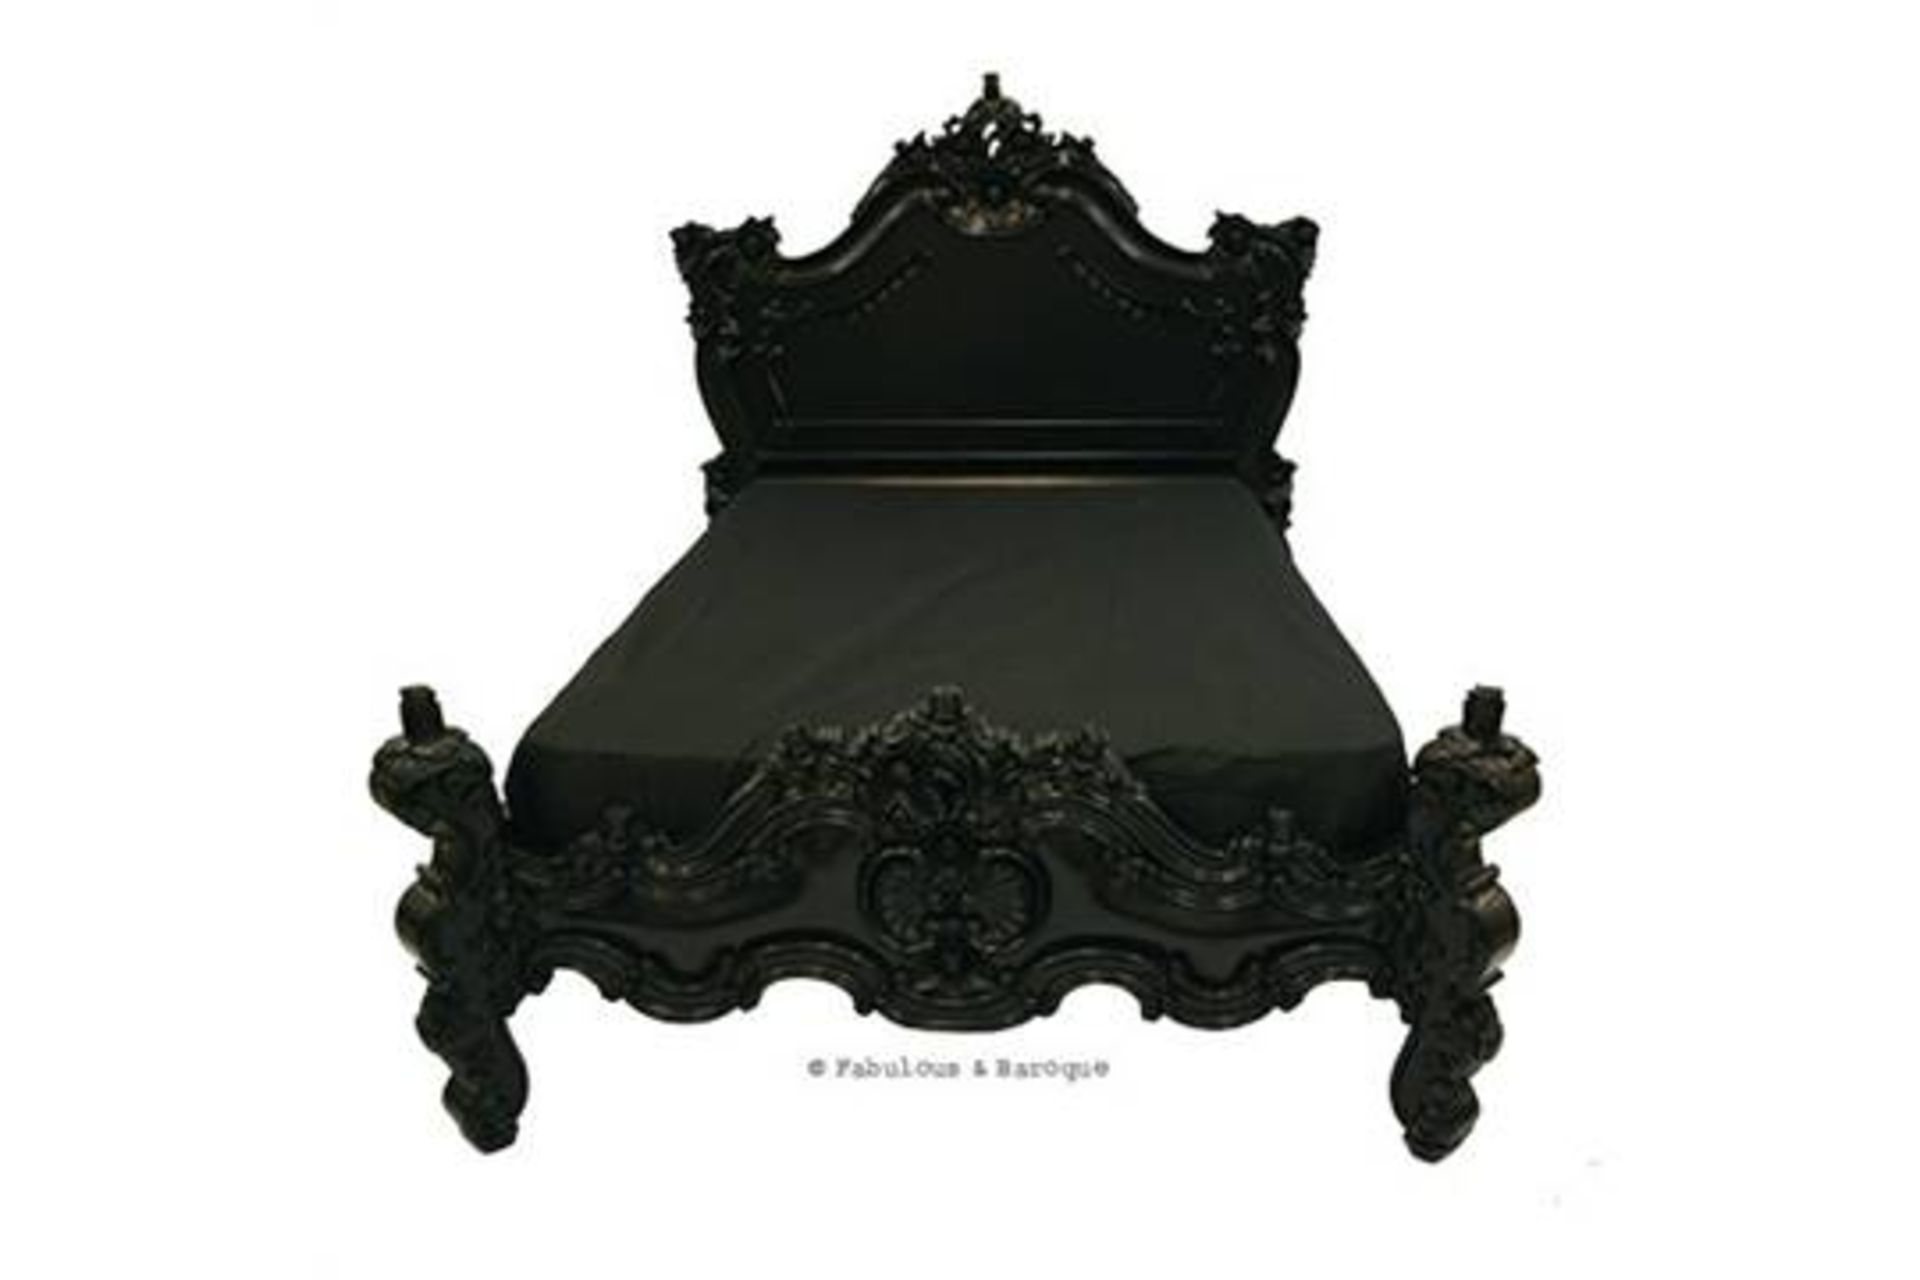 5ft  Double
Royal Fortune Montespan Bed - Black -  The Fabulous & Rococo Bed features
exaggerated - Image 4 of 6